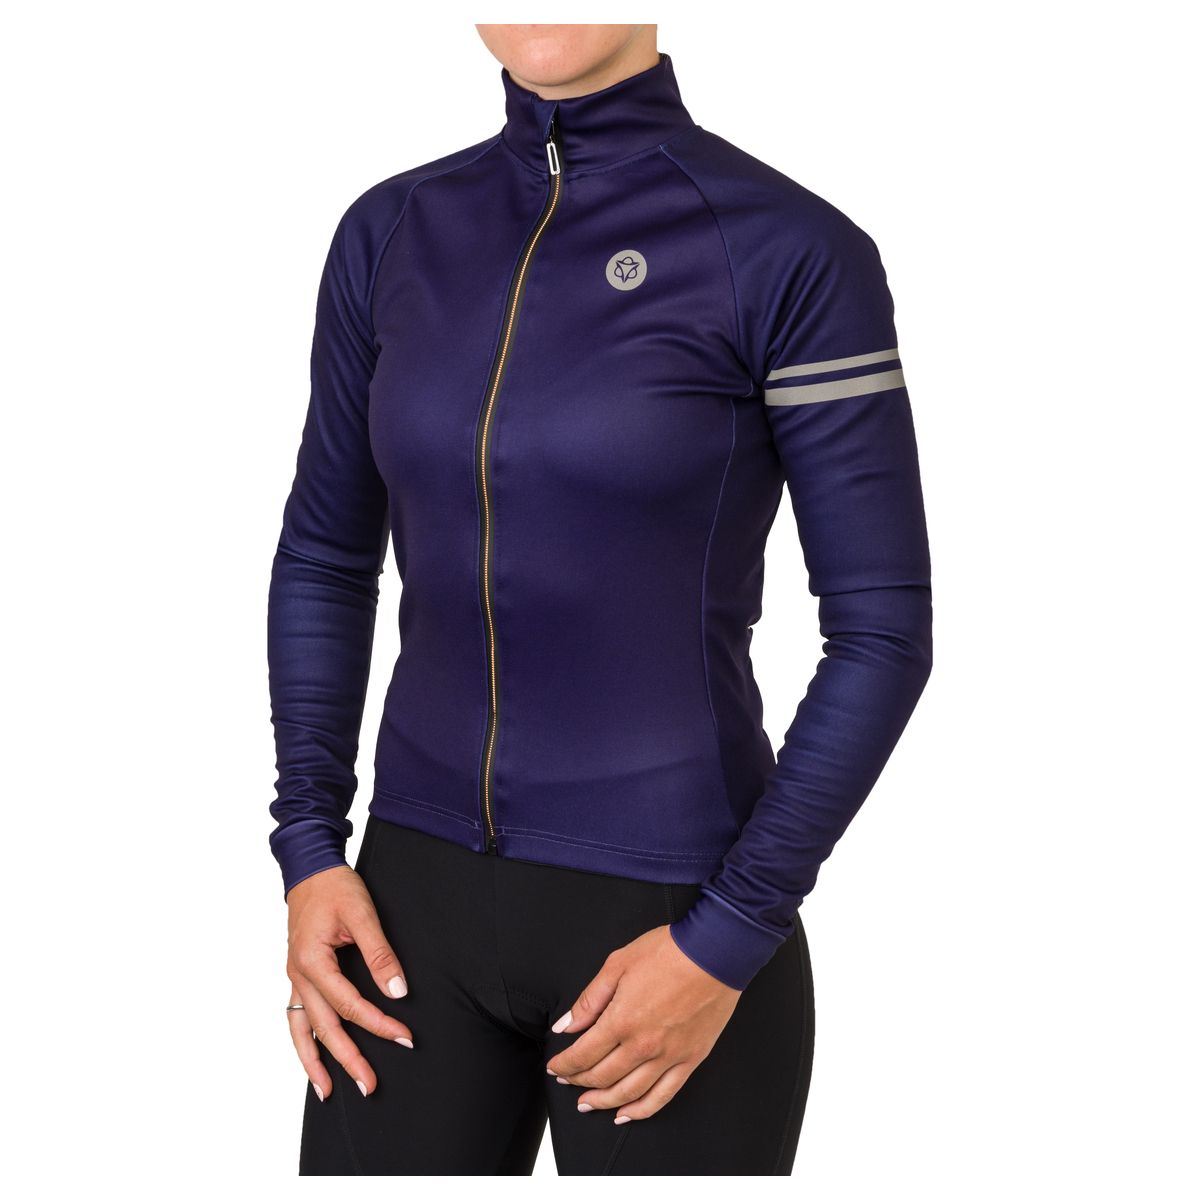 Solid Thermo Jacket II Trend Women fit example